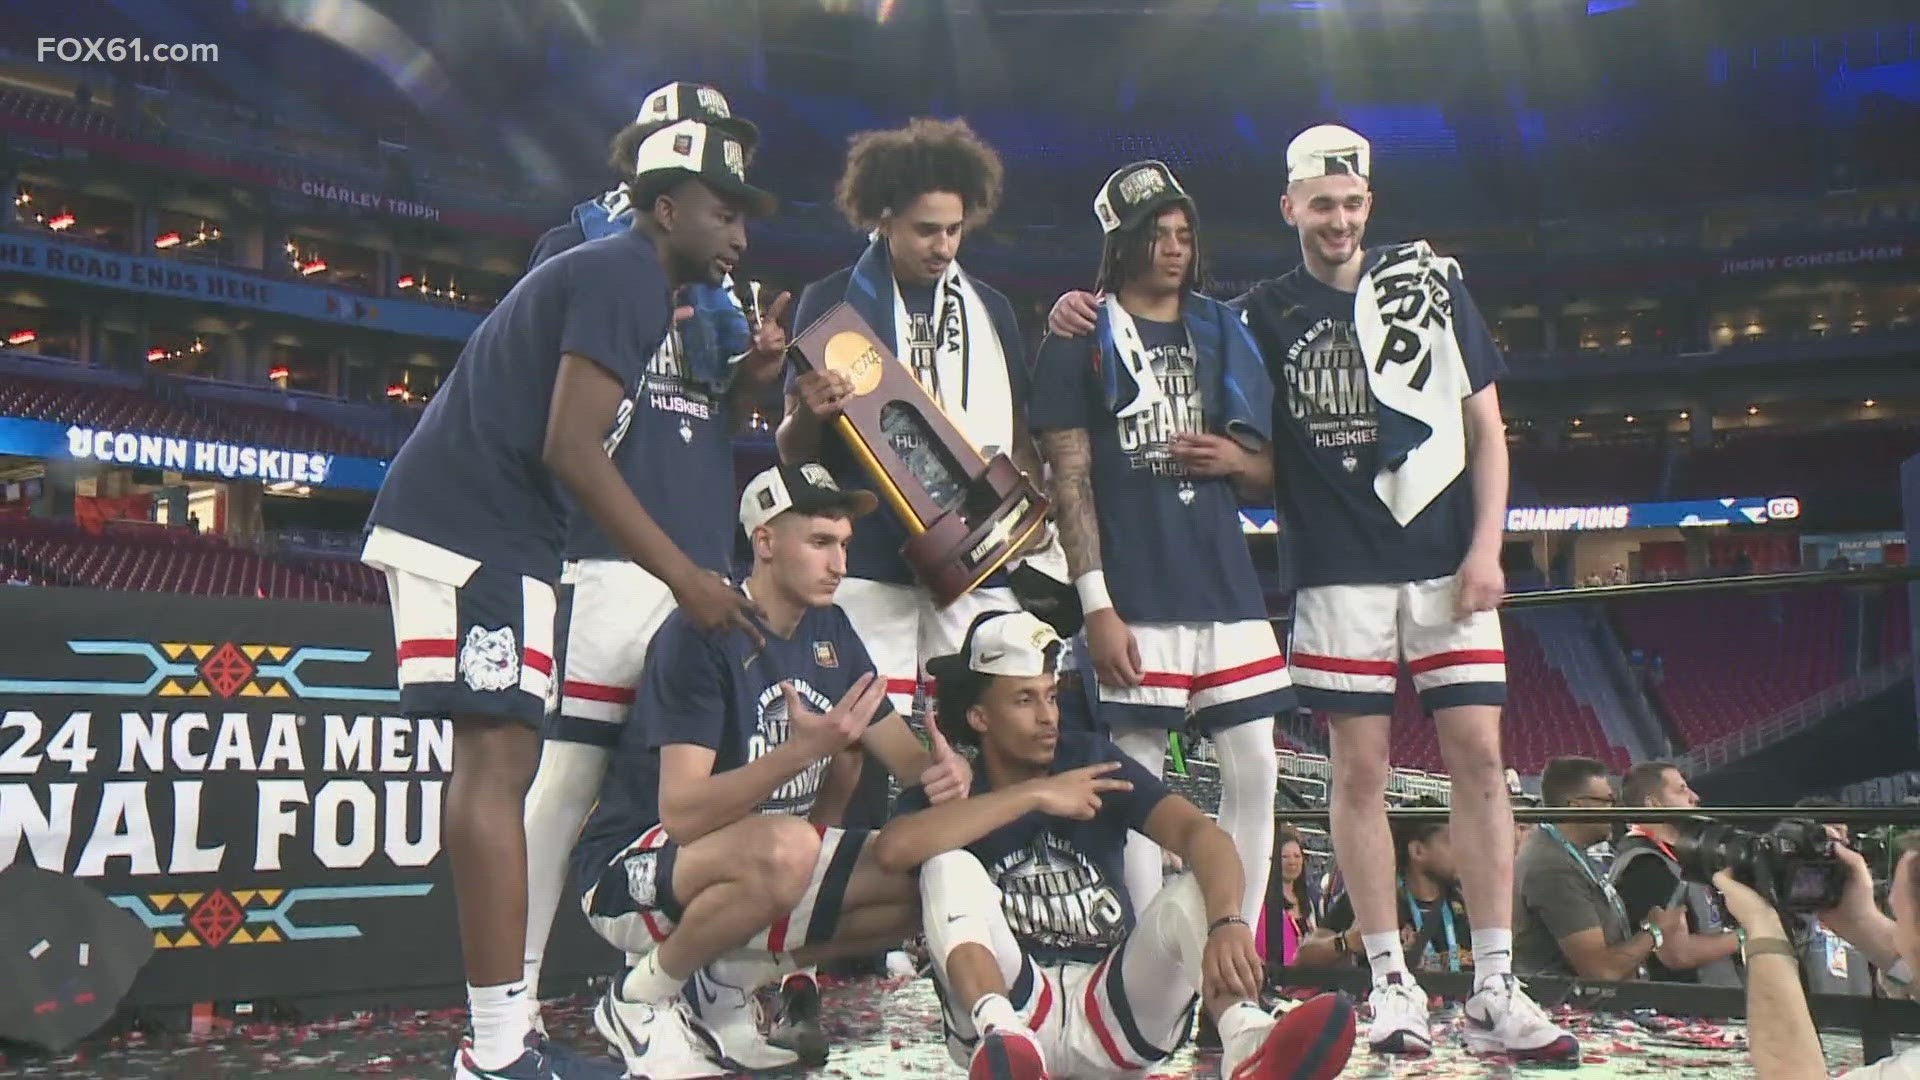 UConn is the first men's college basketball program to win back-to-back national titles since Florida in 2006 and 2007.